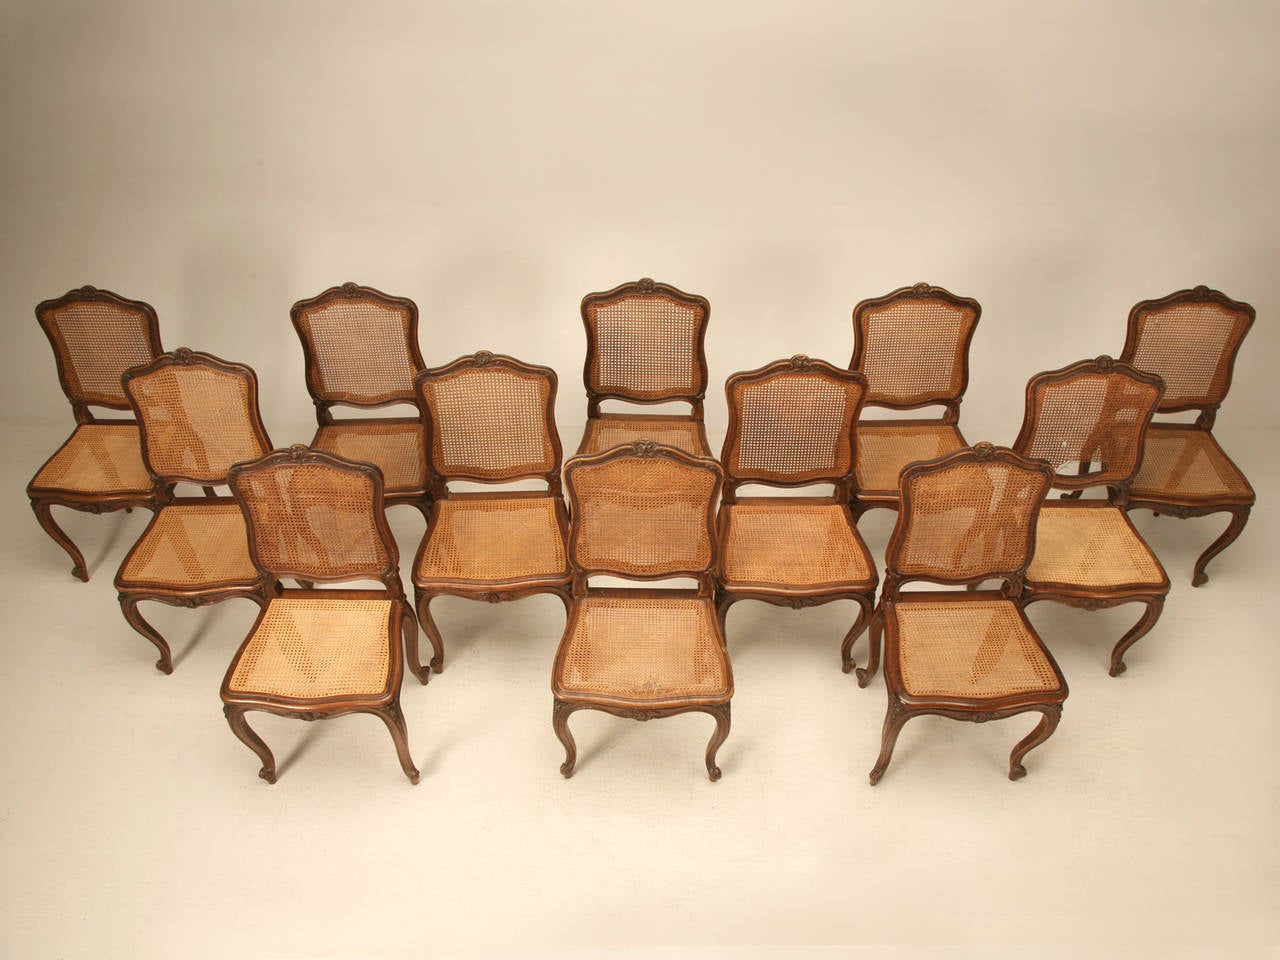 Late 19th Century Rare Set of Twelve Matching Louis XV Style Walnut Dining Chairs